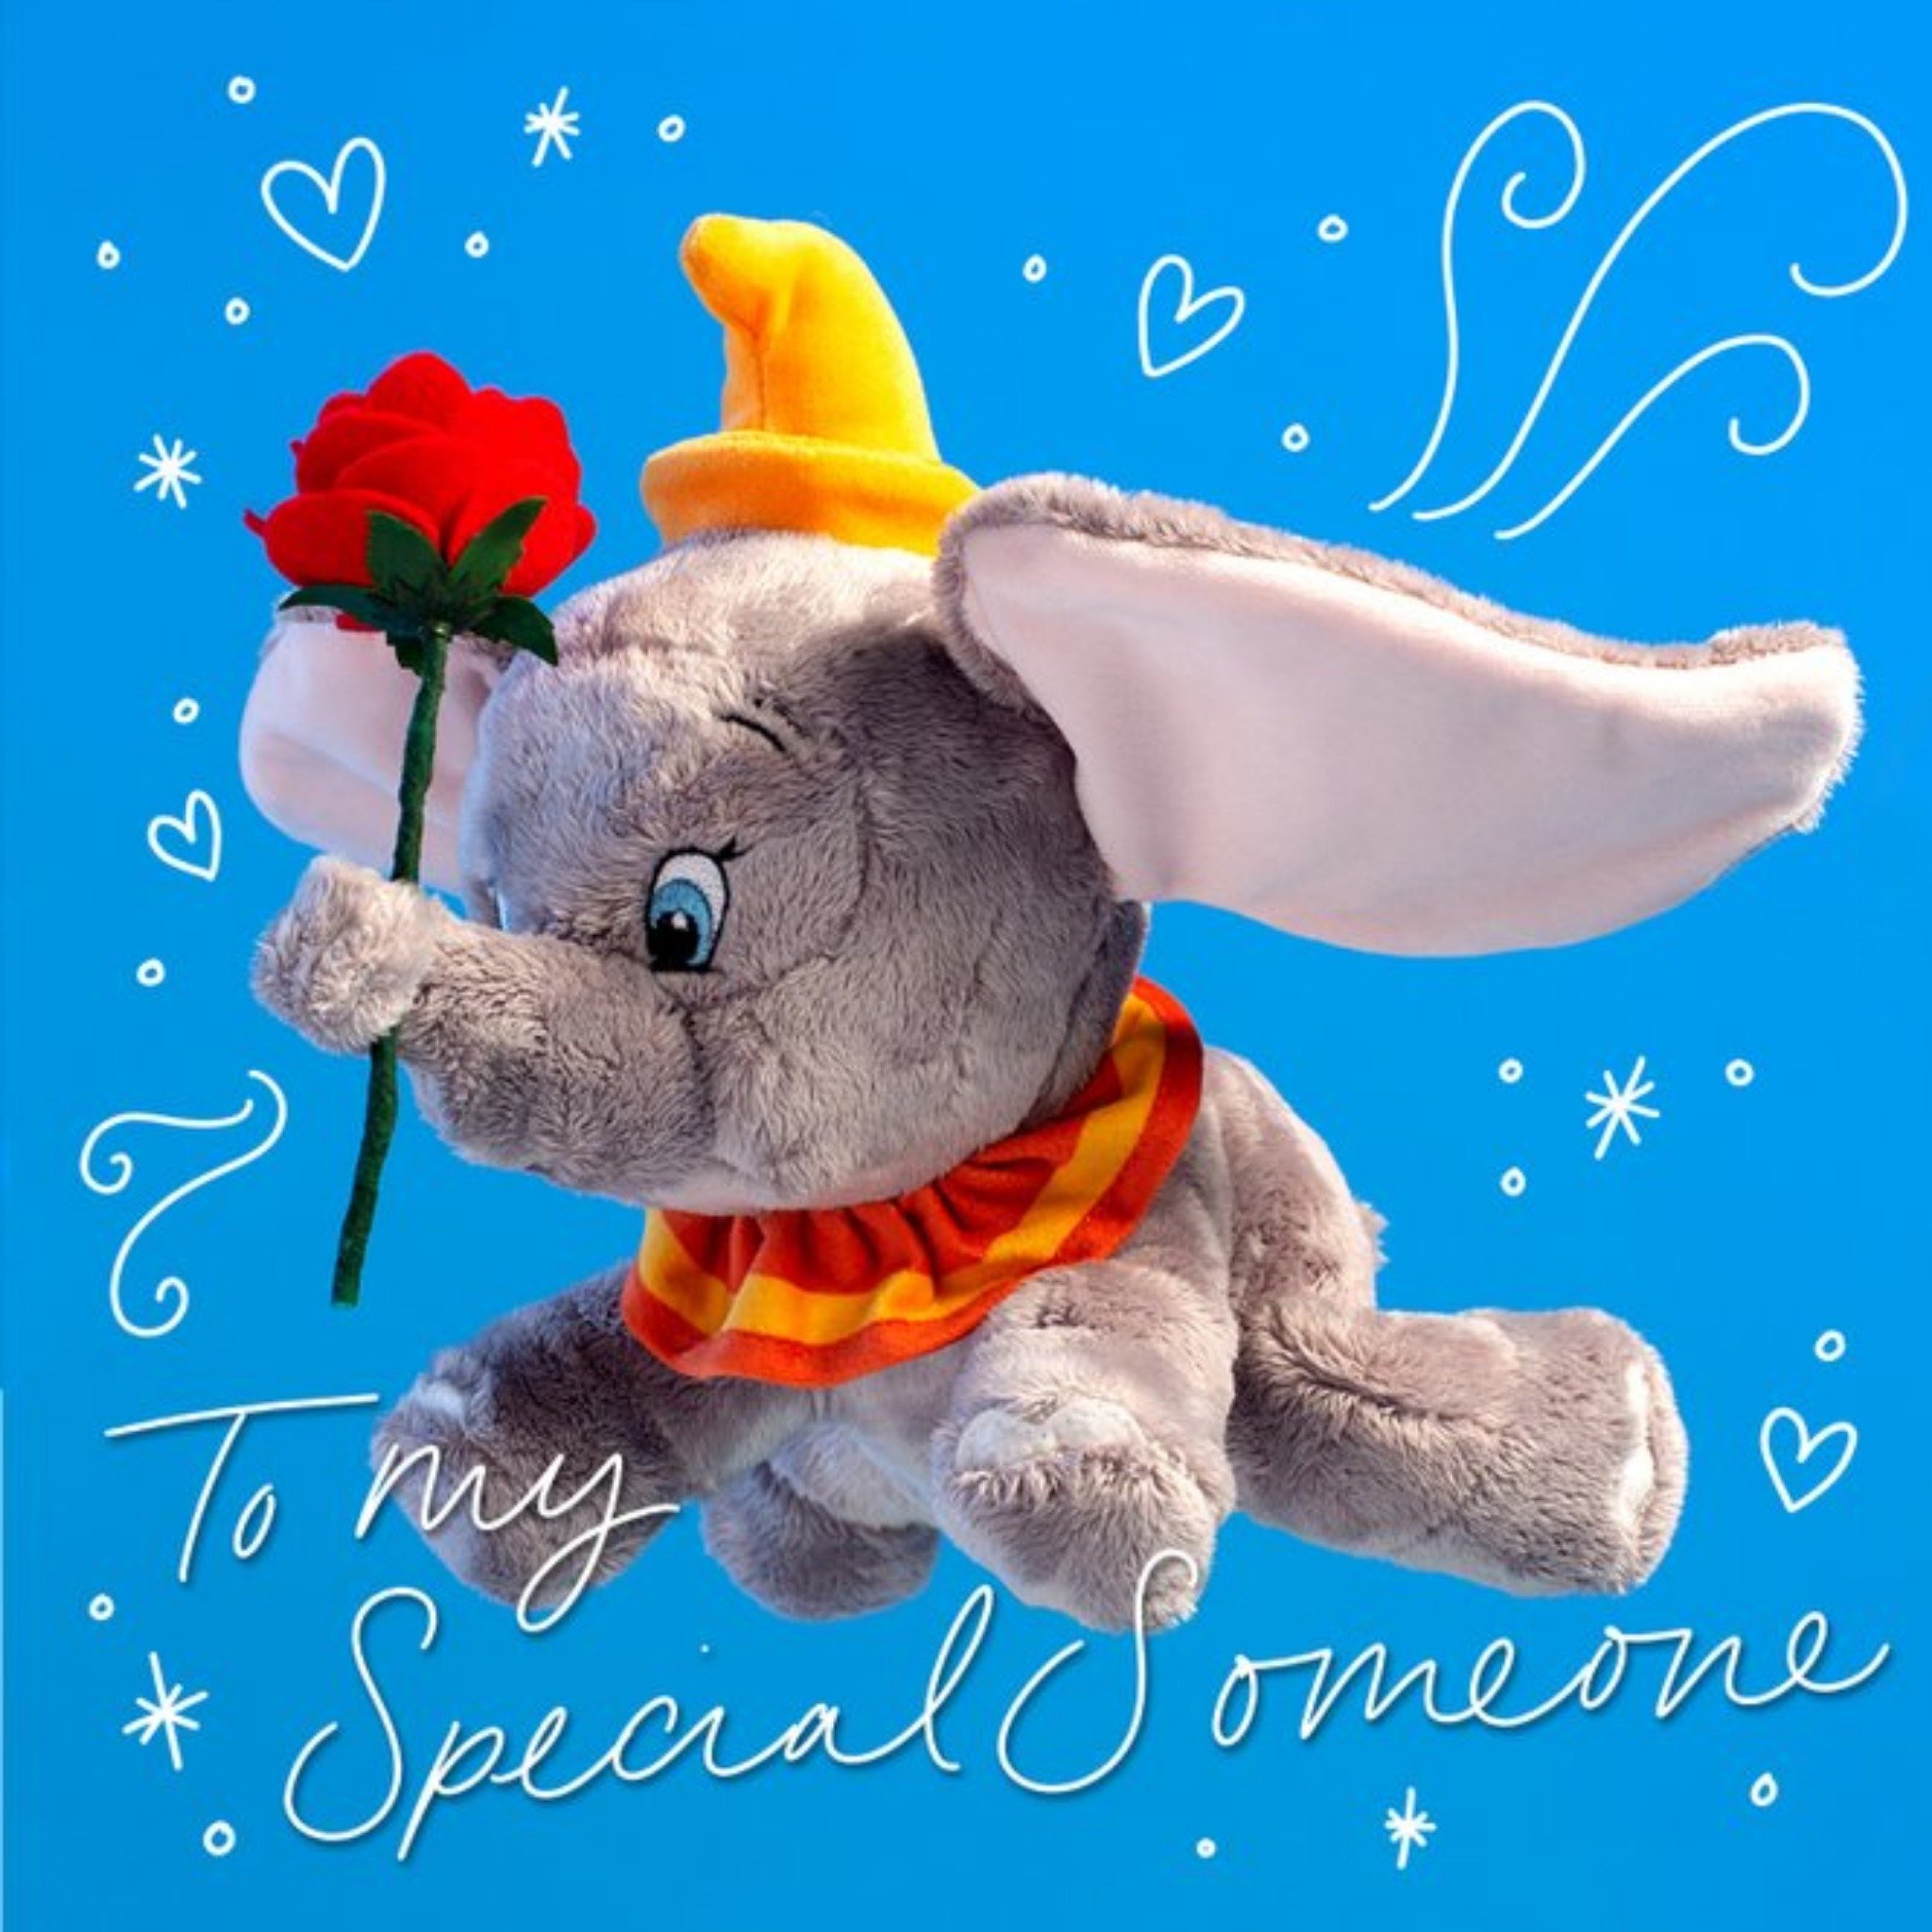 Cute Disney Plush Dumbo To My Special Someone Valentine's Day Card, Square